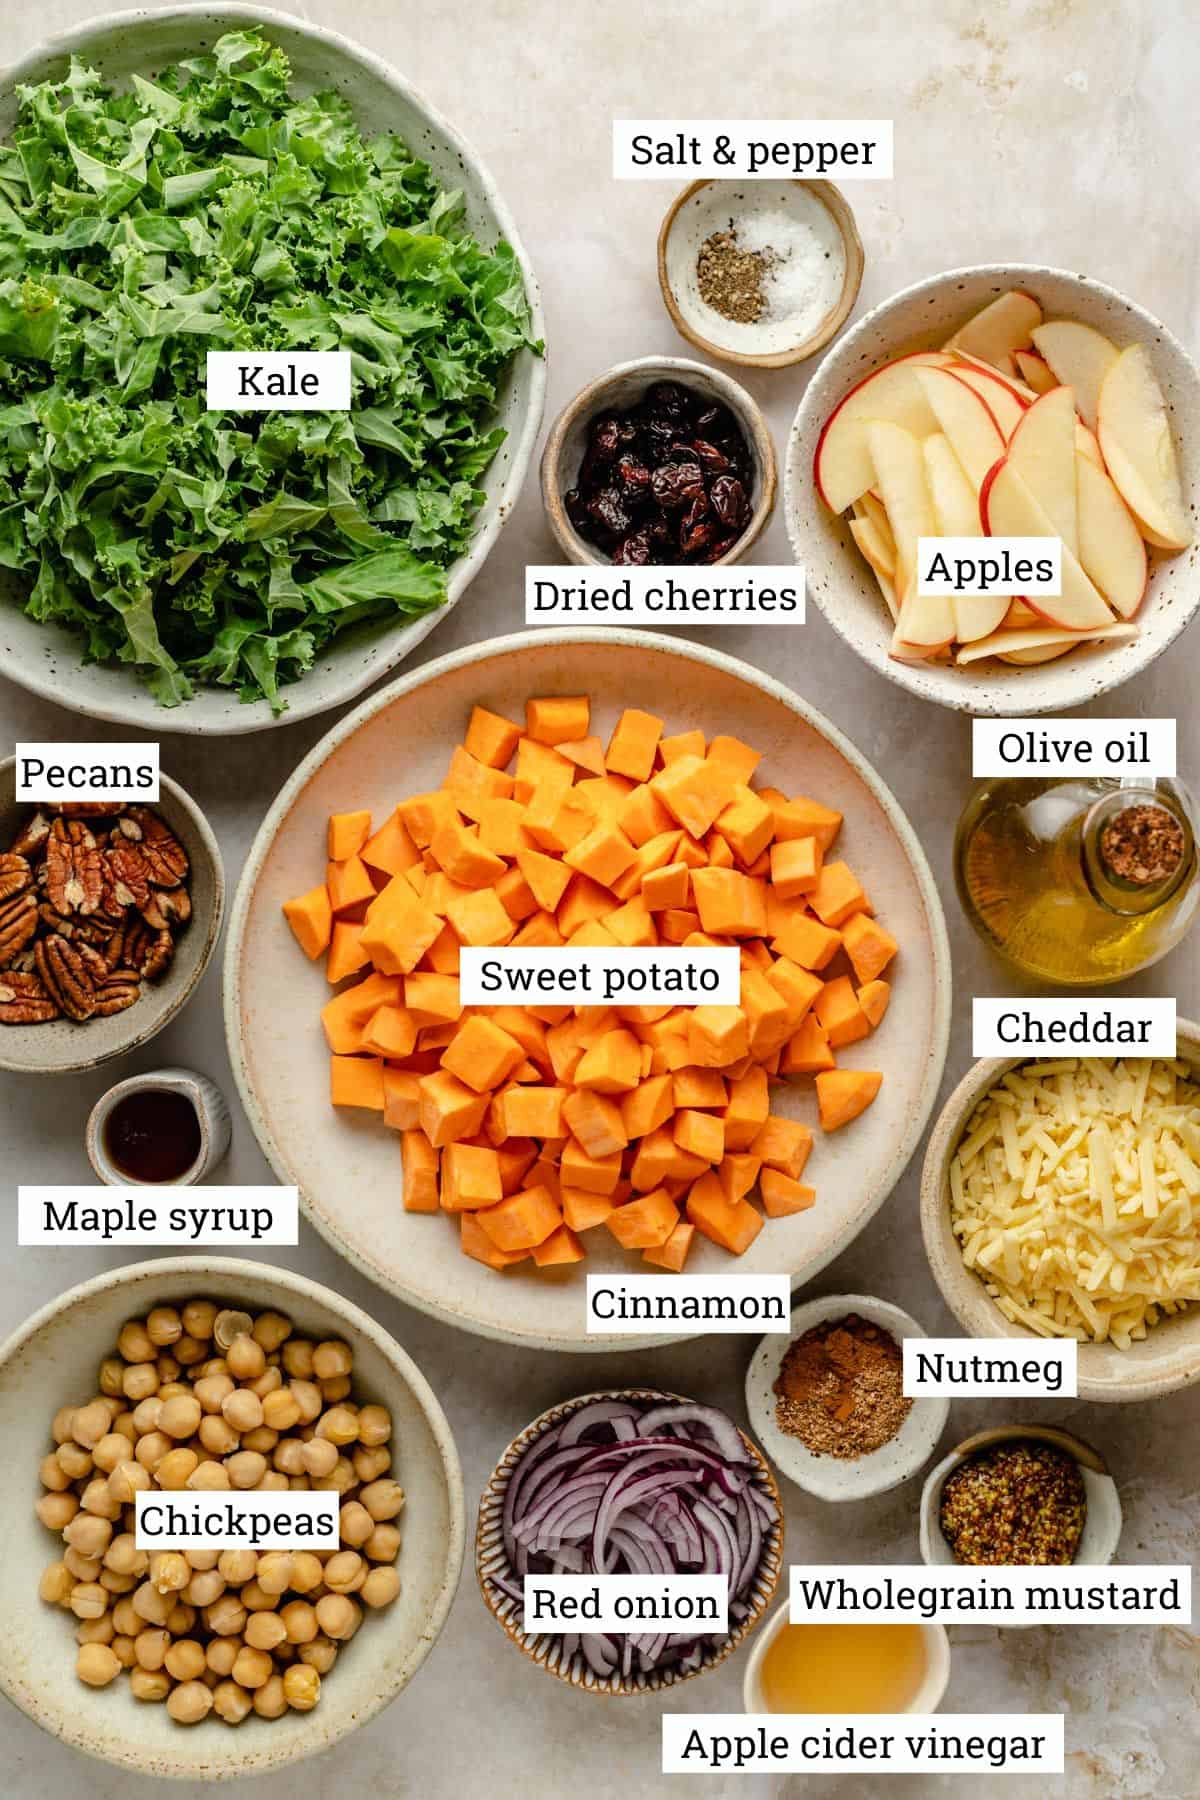 Bowls of ingredients including, sweet potato, kale, apples, pecans, cheddar and chickpeas.